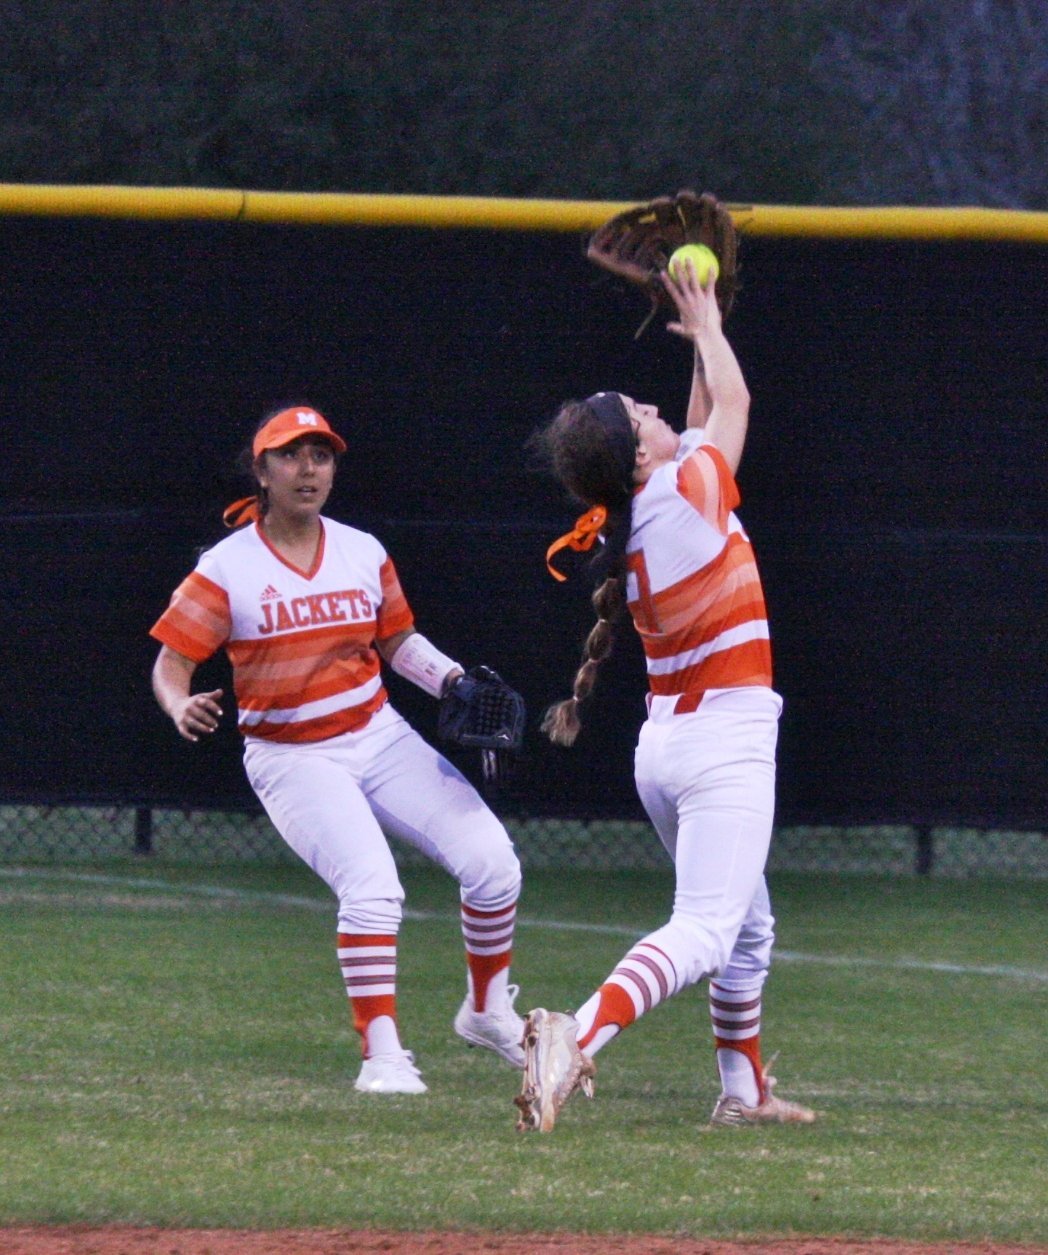 Lady Jacket second baseman Breanna Wilmoth makes an outstanding over-the-shoulder catch in action against Rains as right fielder Claudia Barriga looks on.